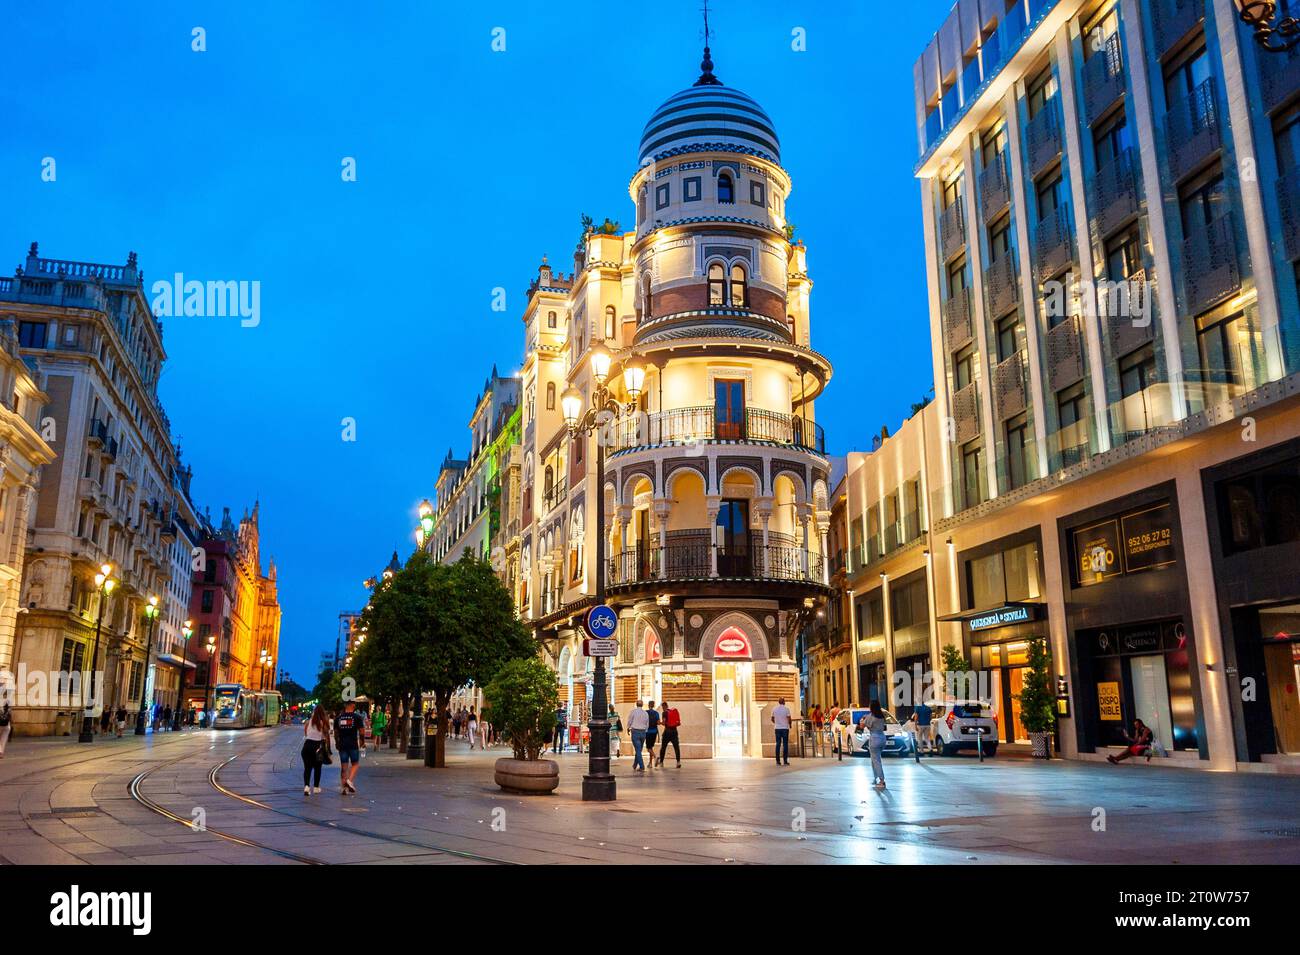 Seville, Spain, Wide Angle View, Street Scene, Tourists Visiting City Center, Night, Lights, 'Ave. de la Constitution' Stock Photo